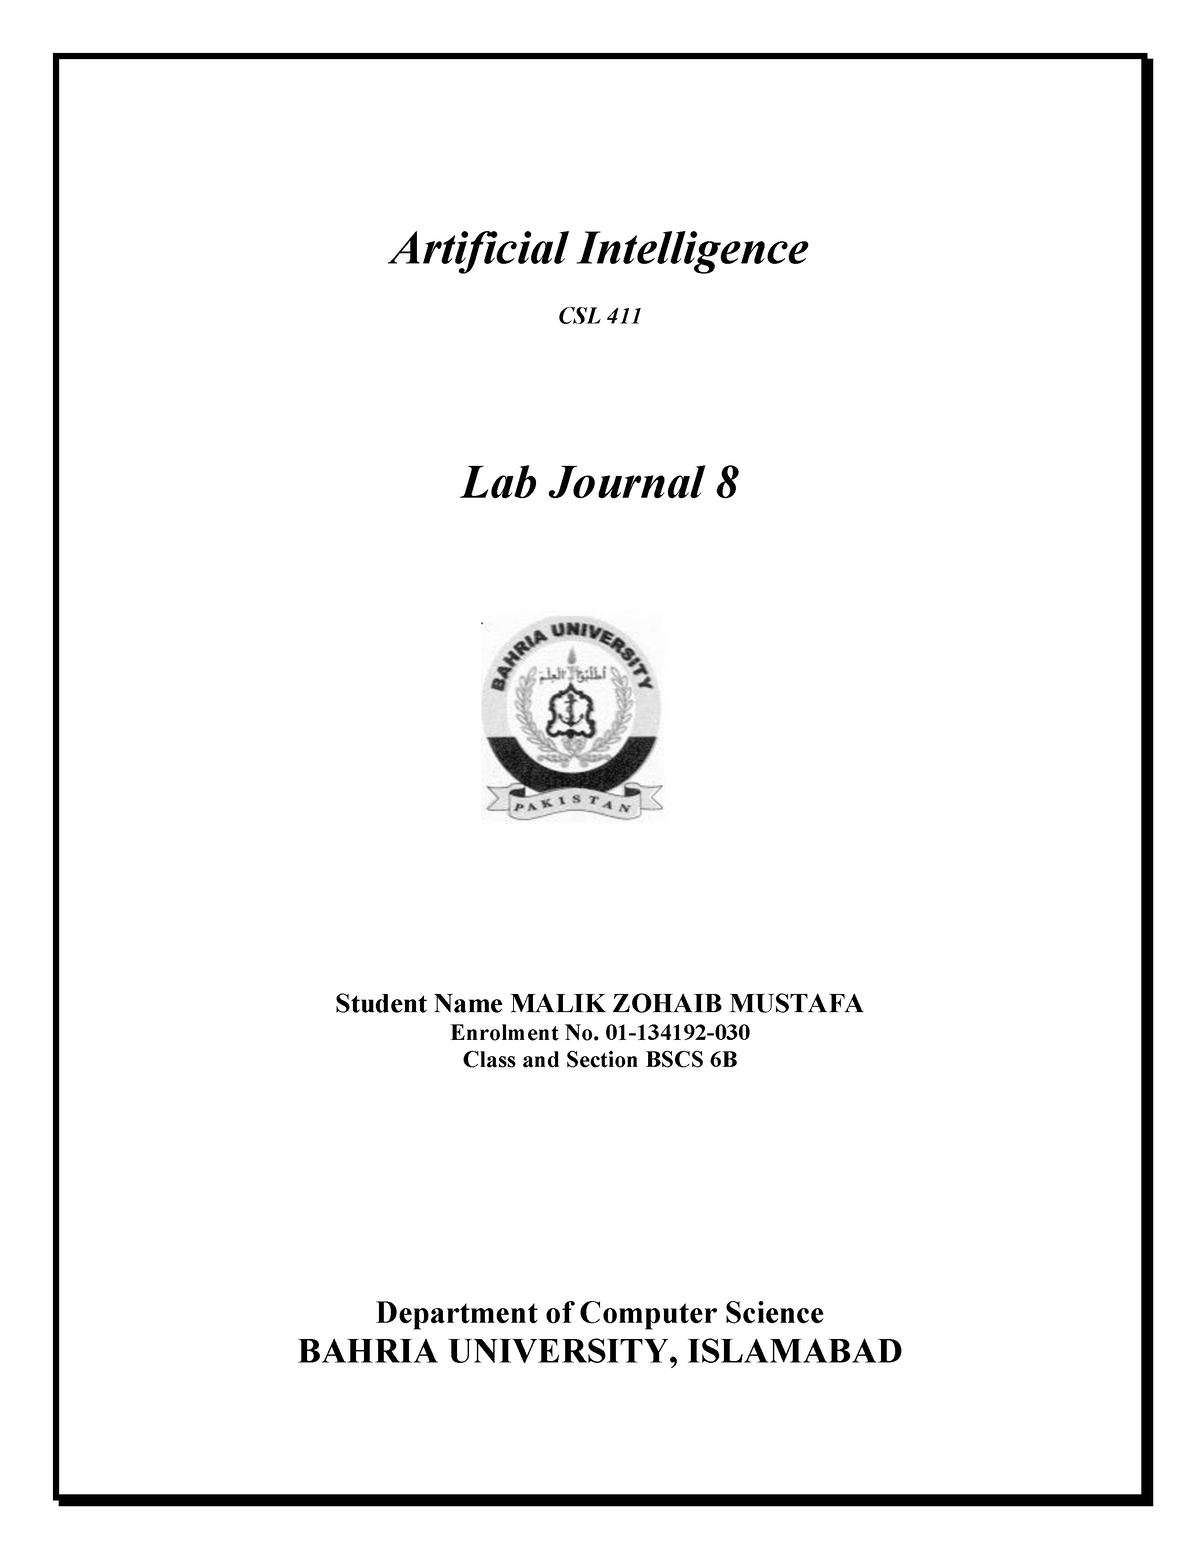 ai-lab-8-this-is-the-artificial-intelligence-lab-journal-for-the-year